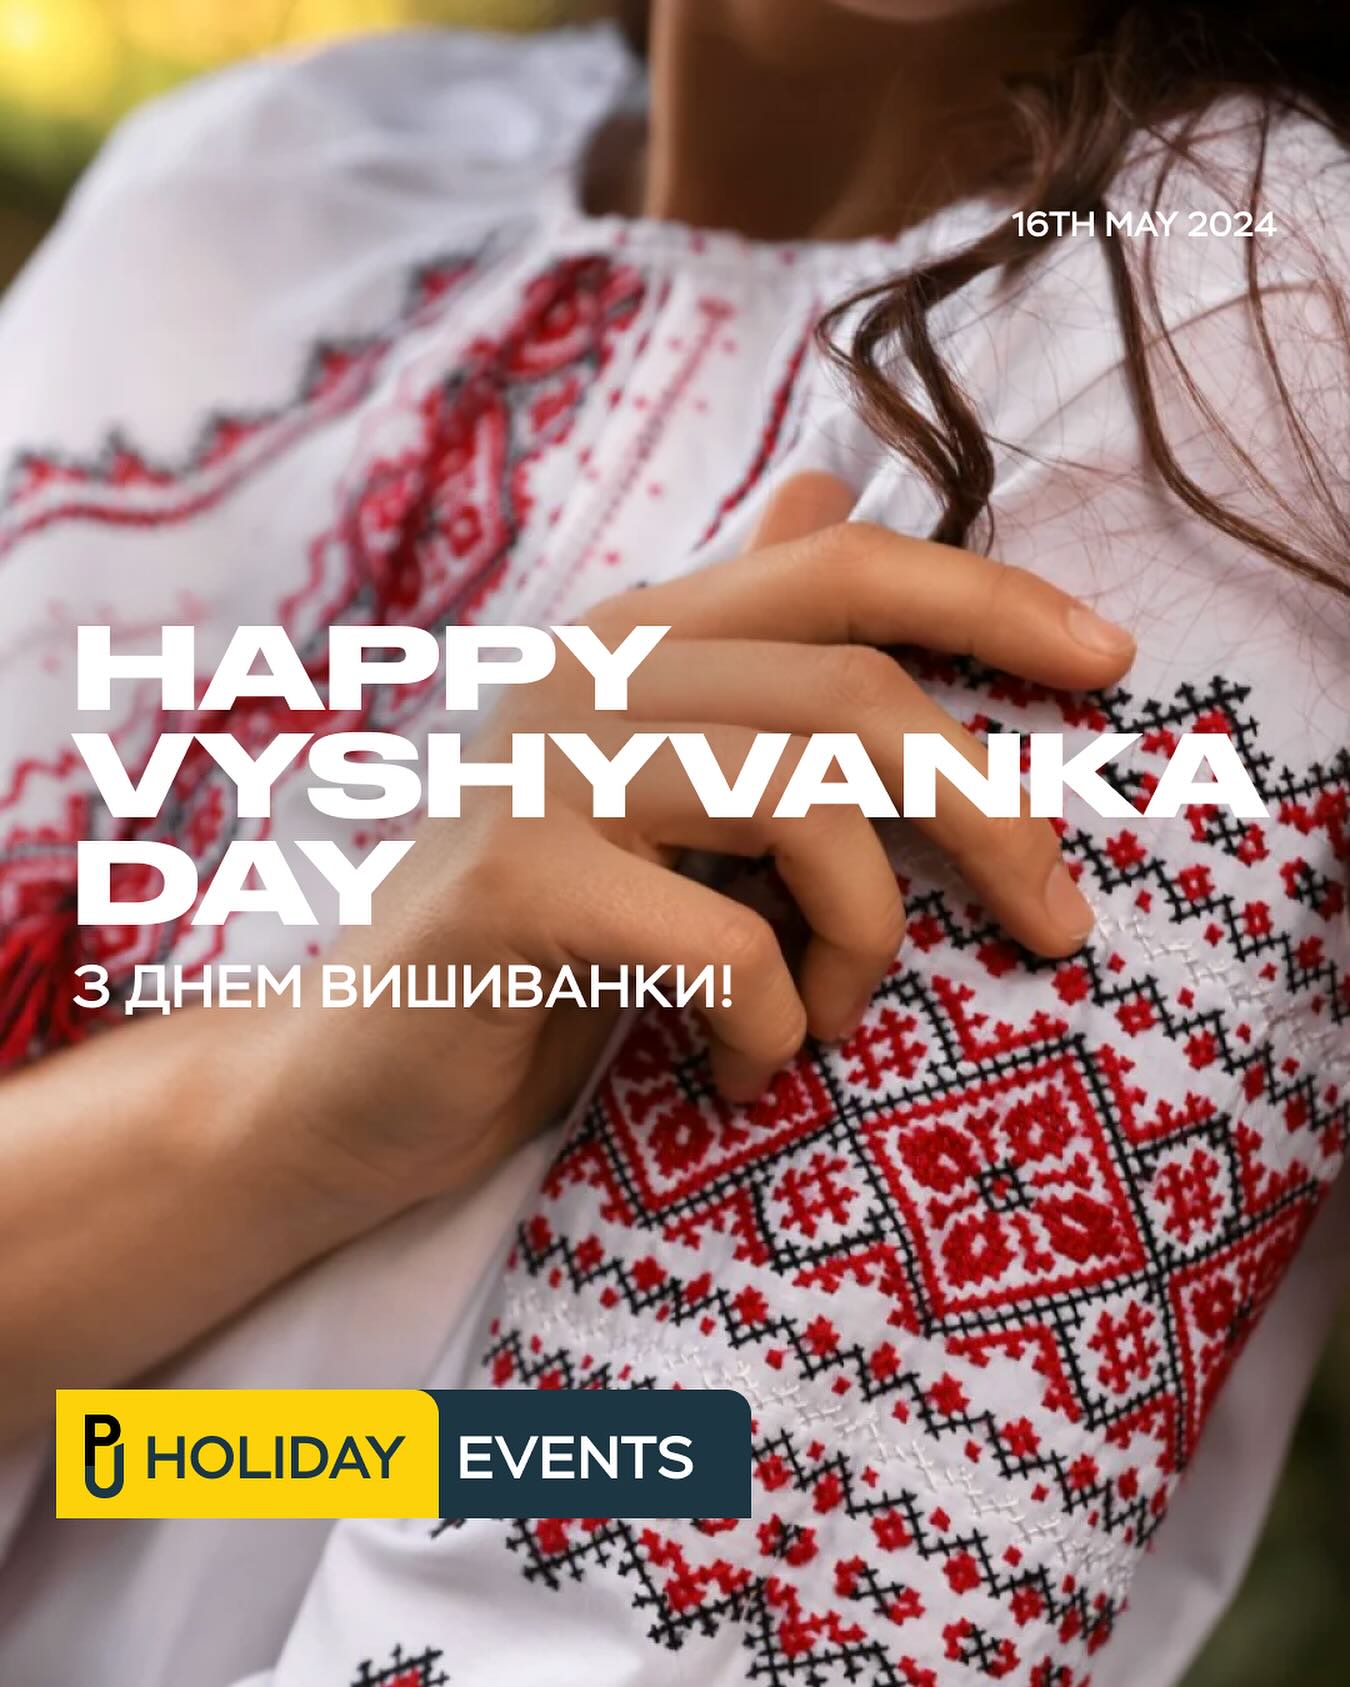 An international holiday that aims to preserve the Ukrainian folk traditions of creating and wearing ethnic embroidered clothes called Vyshyvanka